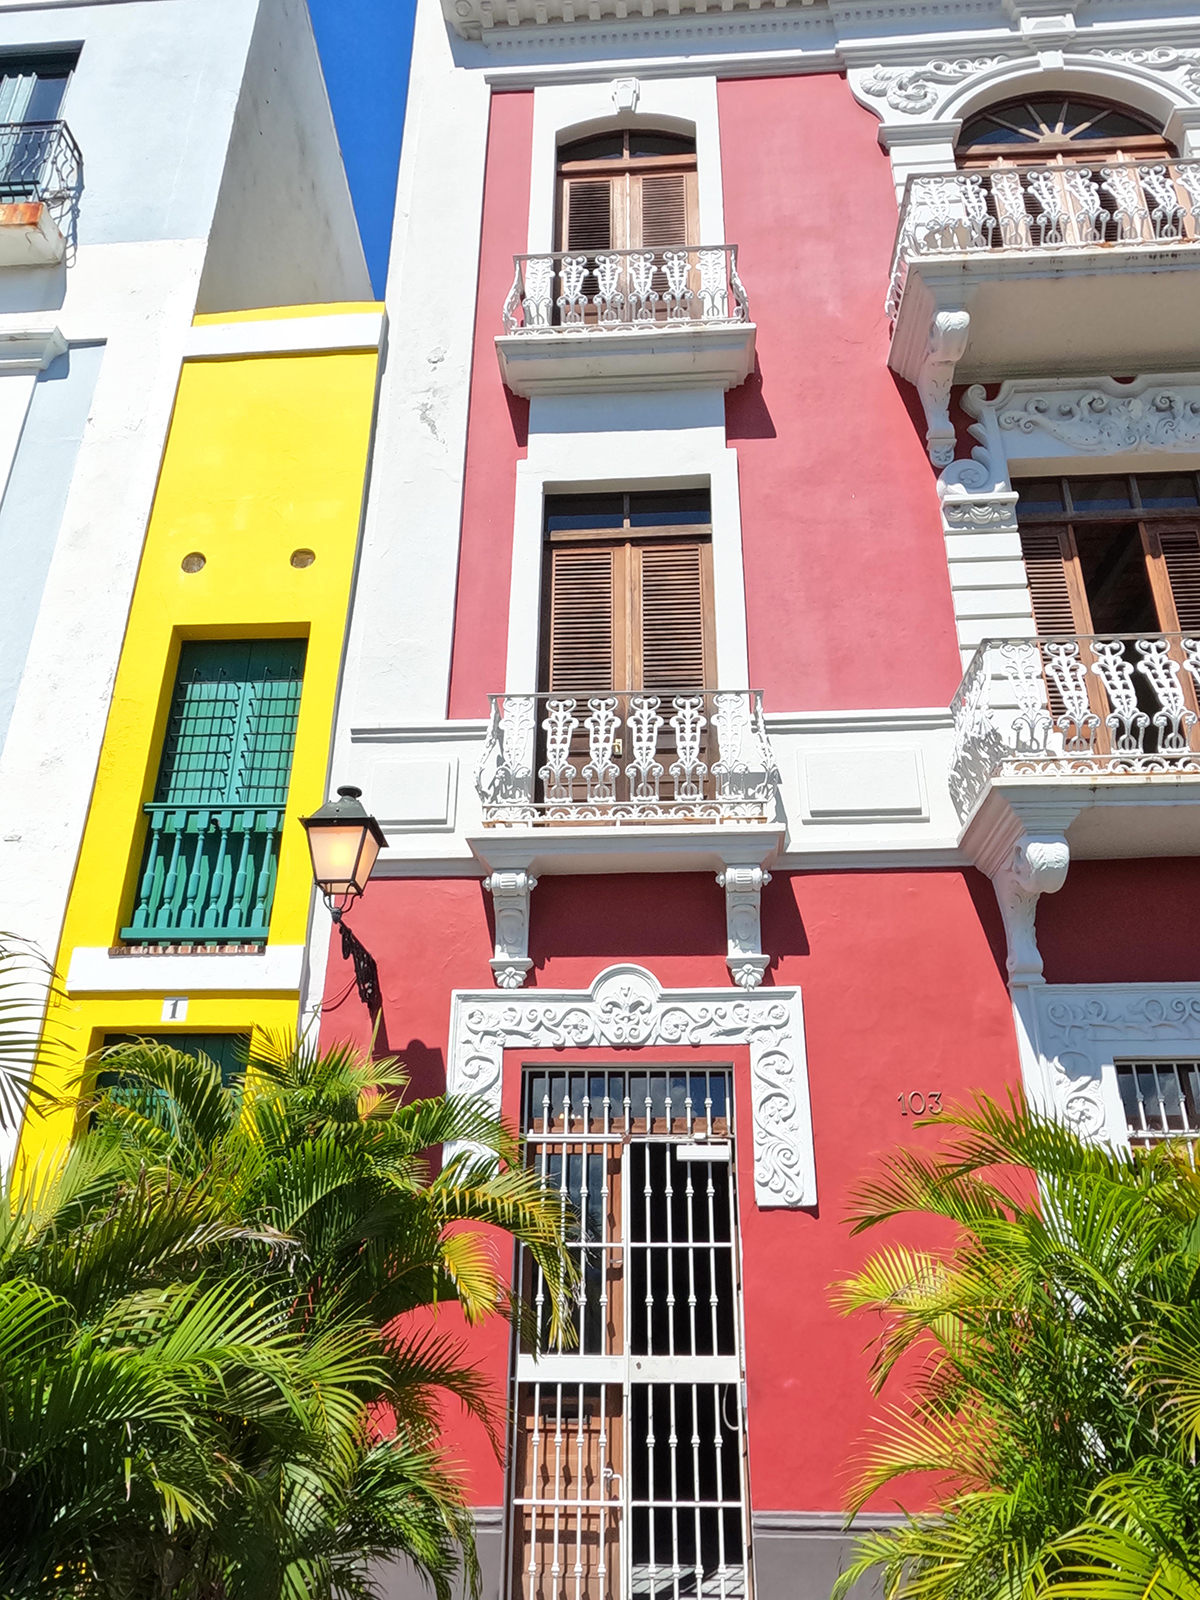 yellow red architecture in old San Juan over Christmas